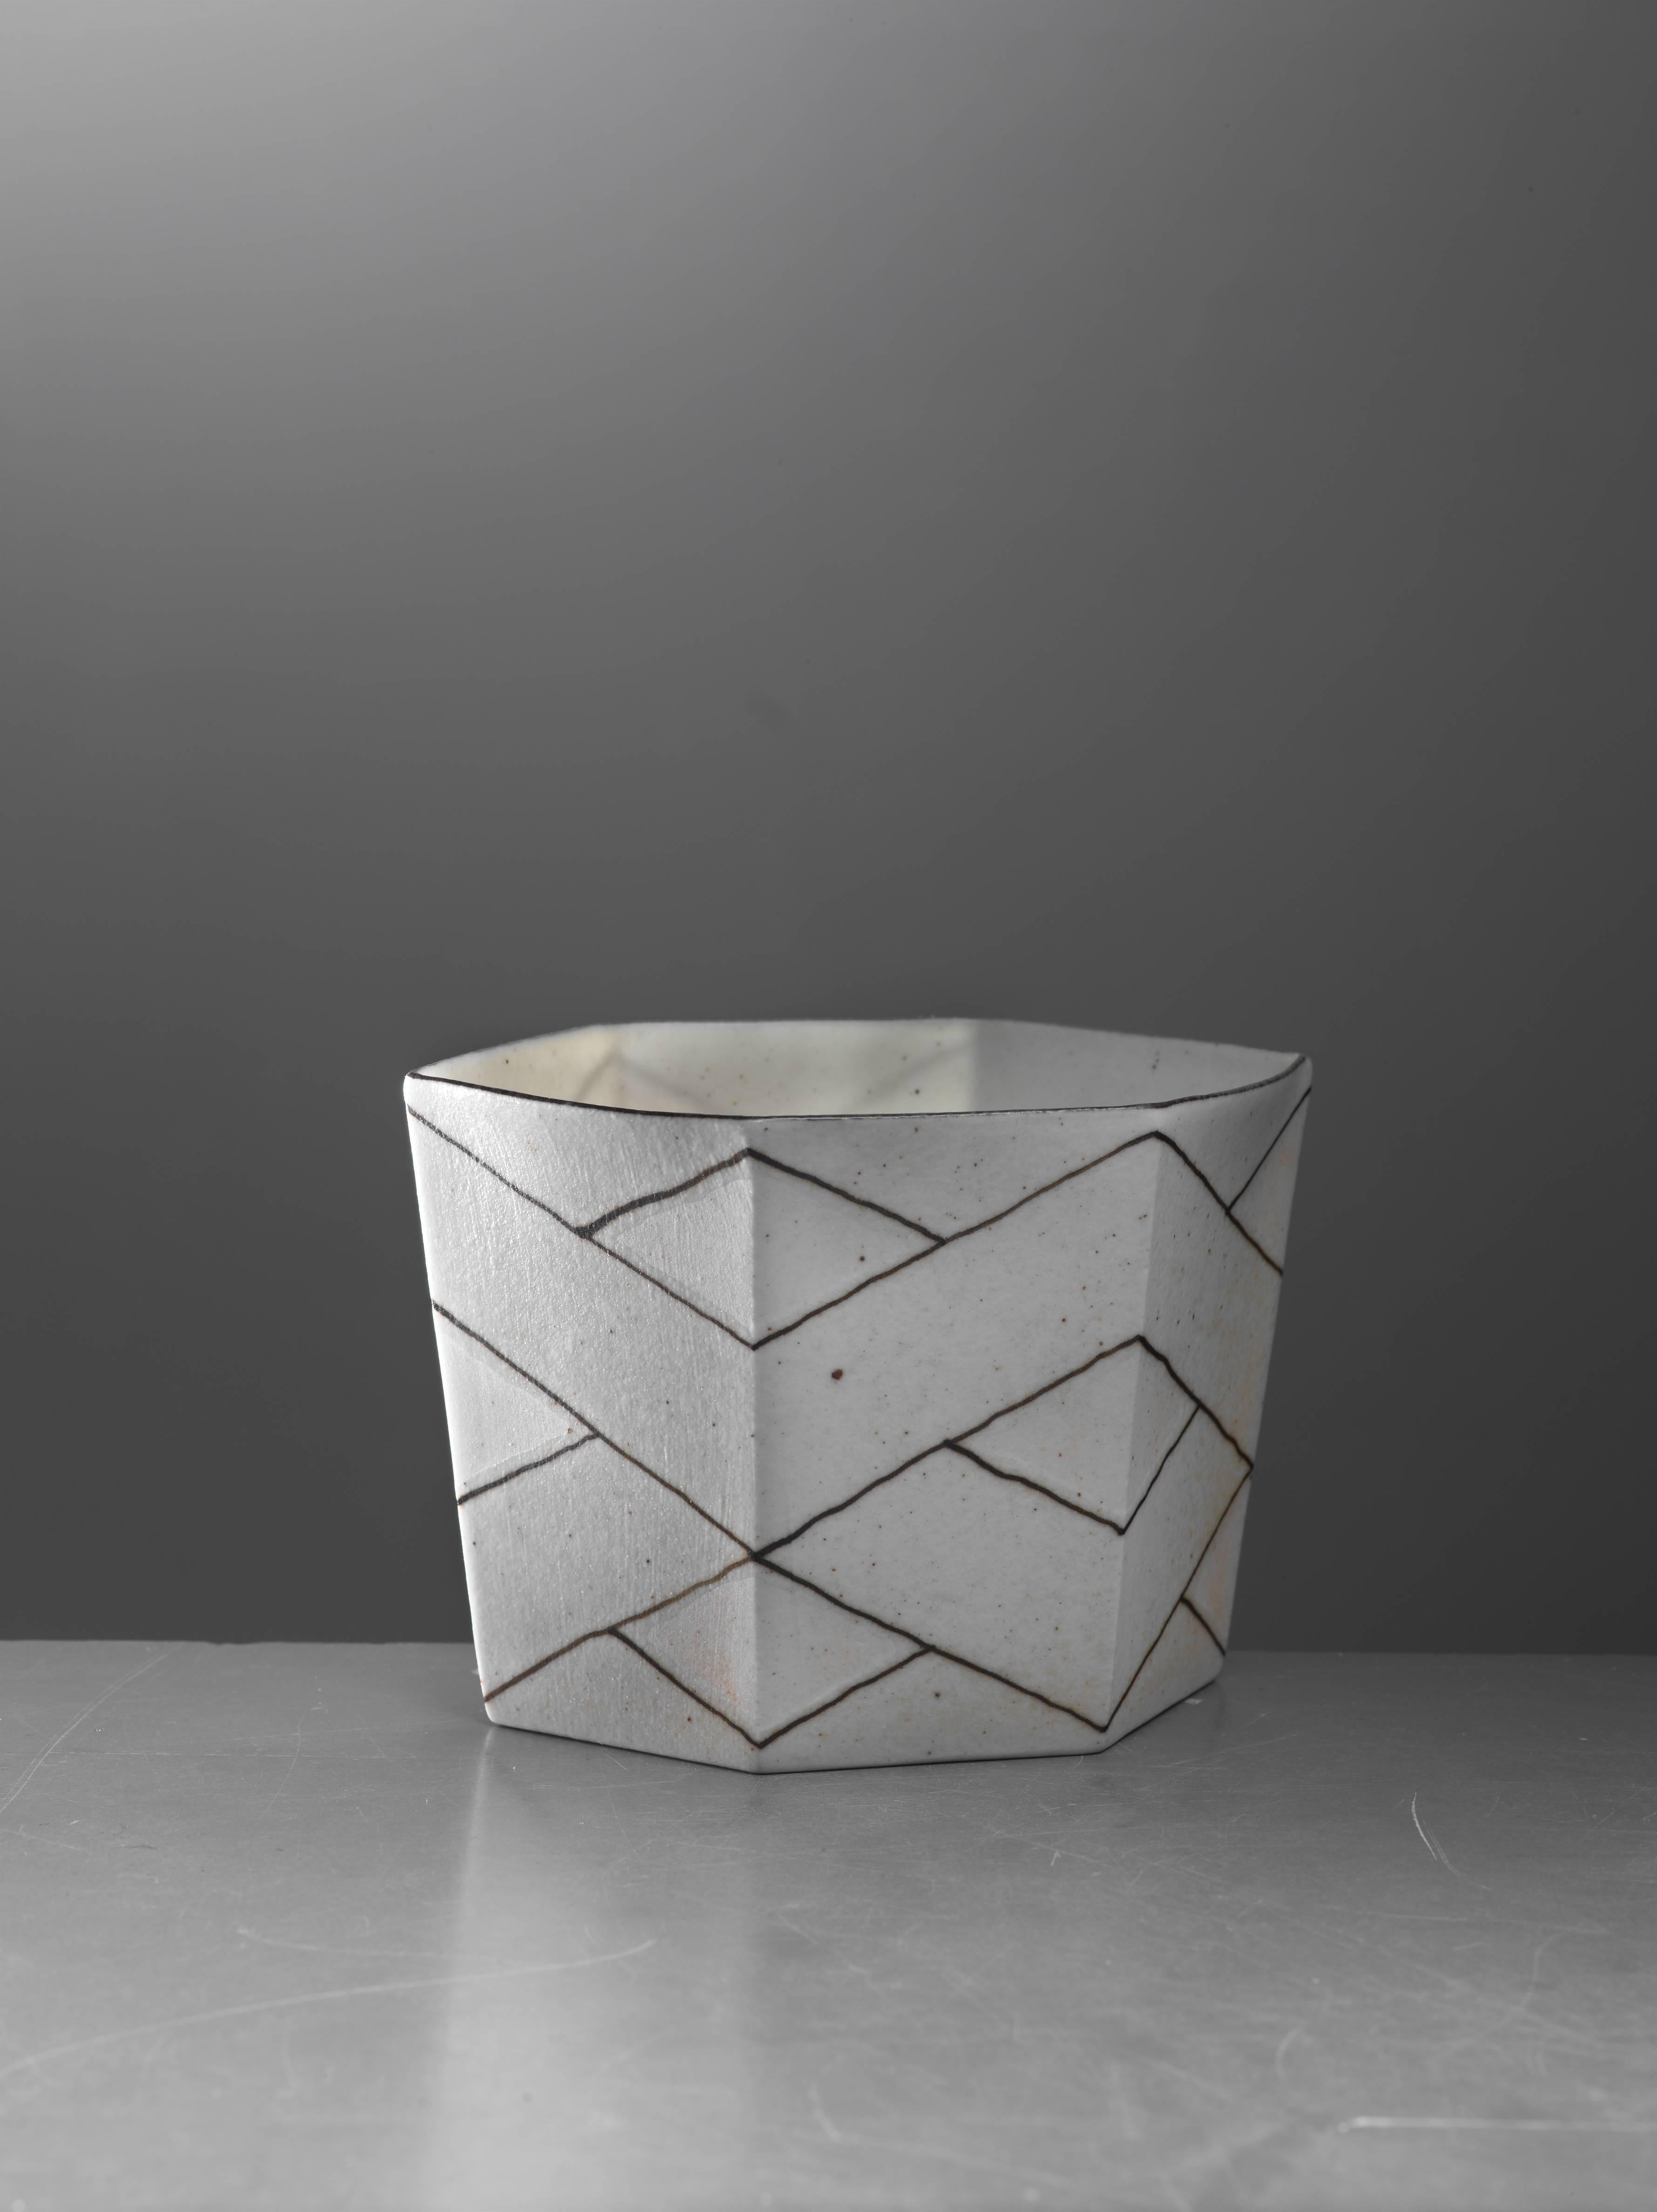 A small, hexagonal porcelain bowl by Danish ceramist Bodil Manz (1943). The bowl is decorated with a geometric pattern, mostly off-white with light pink parts. It is a wonderful sample of the thin, translucent porcelain pieces Bodil Manz is known